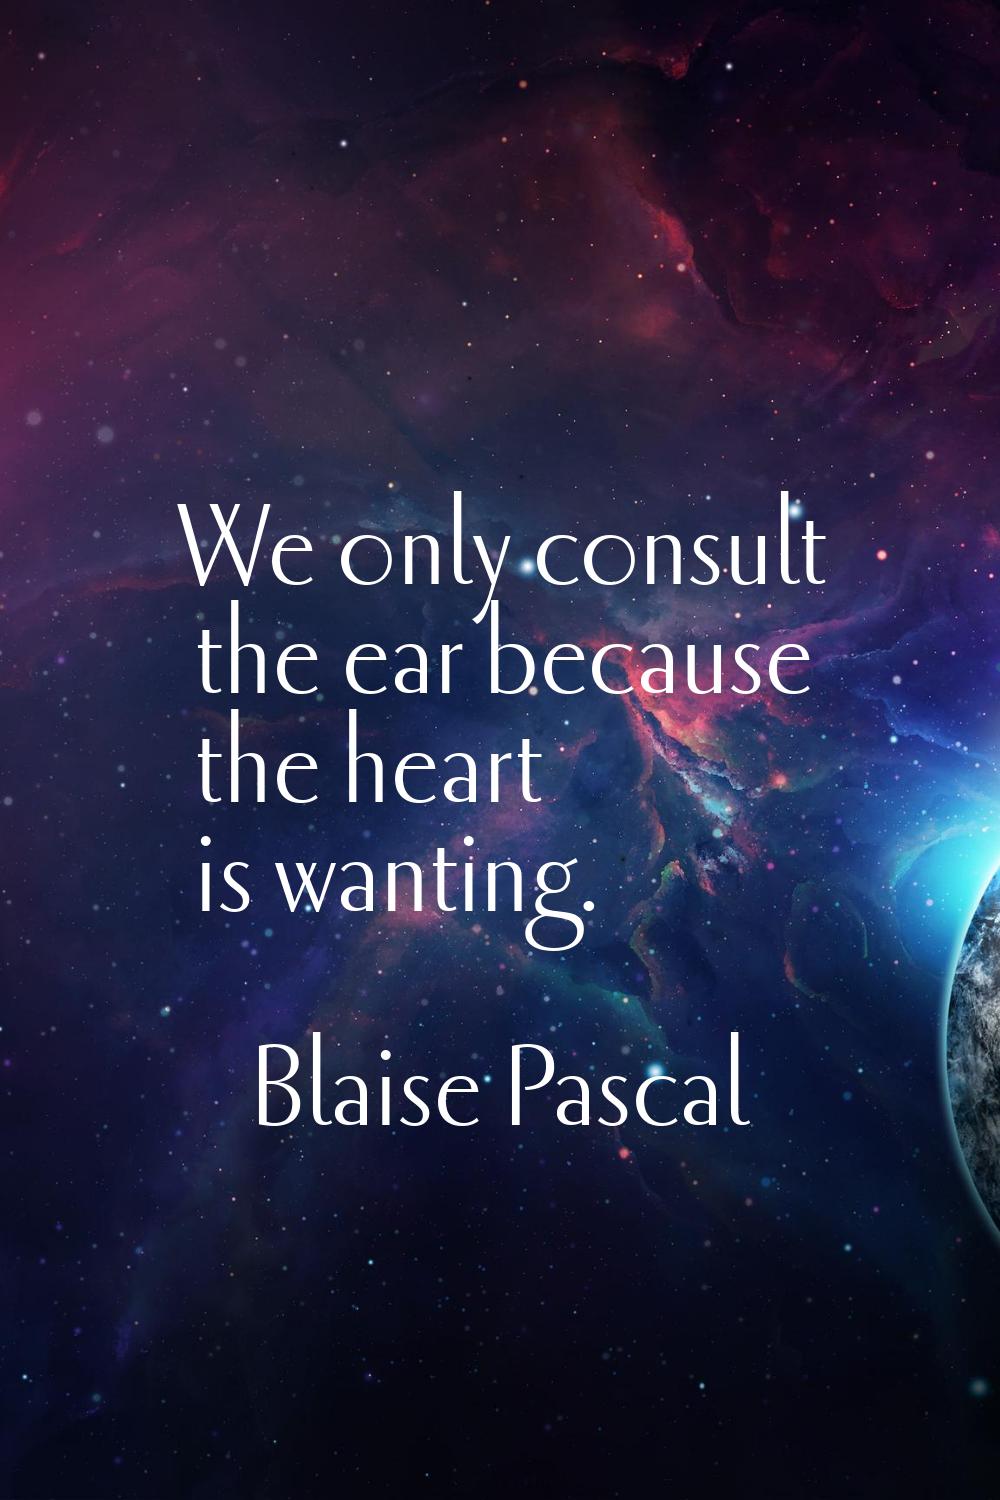 We only consult the ear because the heart is wanting.